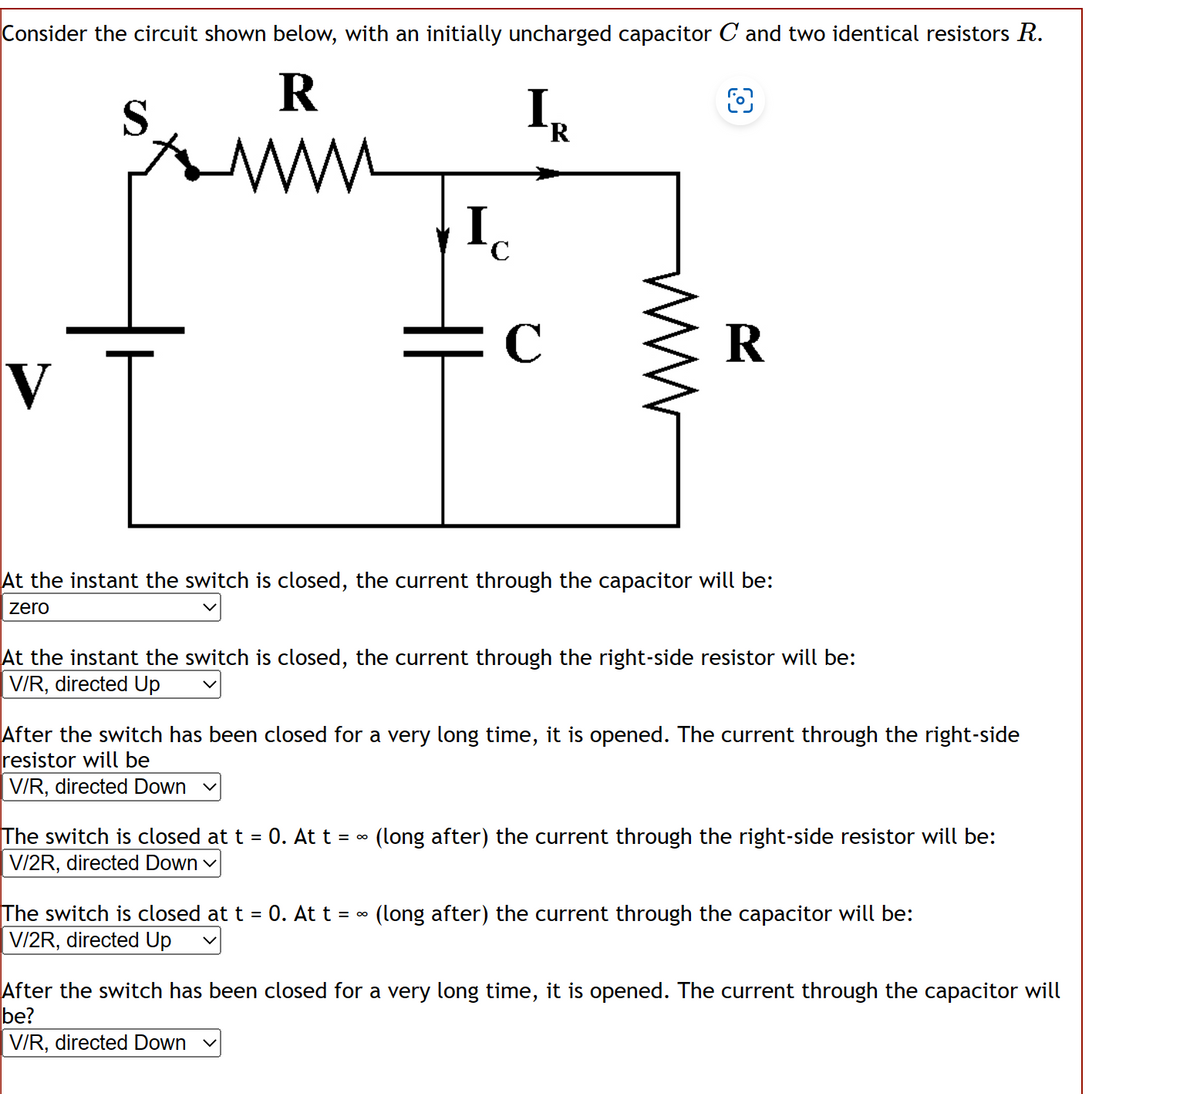 Consider the circuit shown below, with an initially uncharged capacitor C and two identical resistors R.
R
O
www
V
I
C
I₂
R
C
R
At the instant the switch is closed, the current through the capacitor will be:
zero
At the instant the switch is closed, the current through the right-side resistor will be:
V/R, directed Up
After the switch has been closed for a very long time, it is opened. The current through the right-side
resistor will be
V/R, directed Down
The switch is closed at t = 0. At t = ~ (long after) the current through the right-side resistor will be:
V/2R, directed Down ✓
The switch is closed at t = 0. At t = ~ (long after) the current through the capacitor will be:
V/2R, directed Up
After the switch has been closed for a very long time, it is ope ed. The current through the
be?
V/R, directed Down
pacitor will